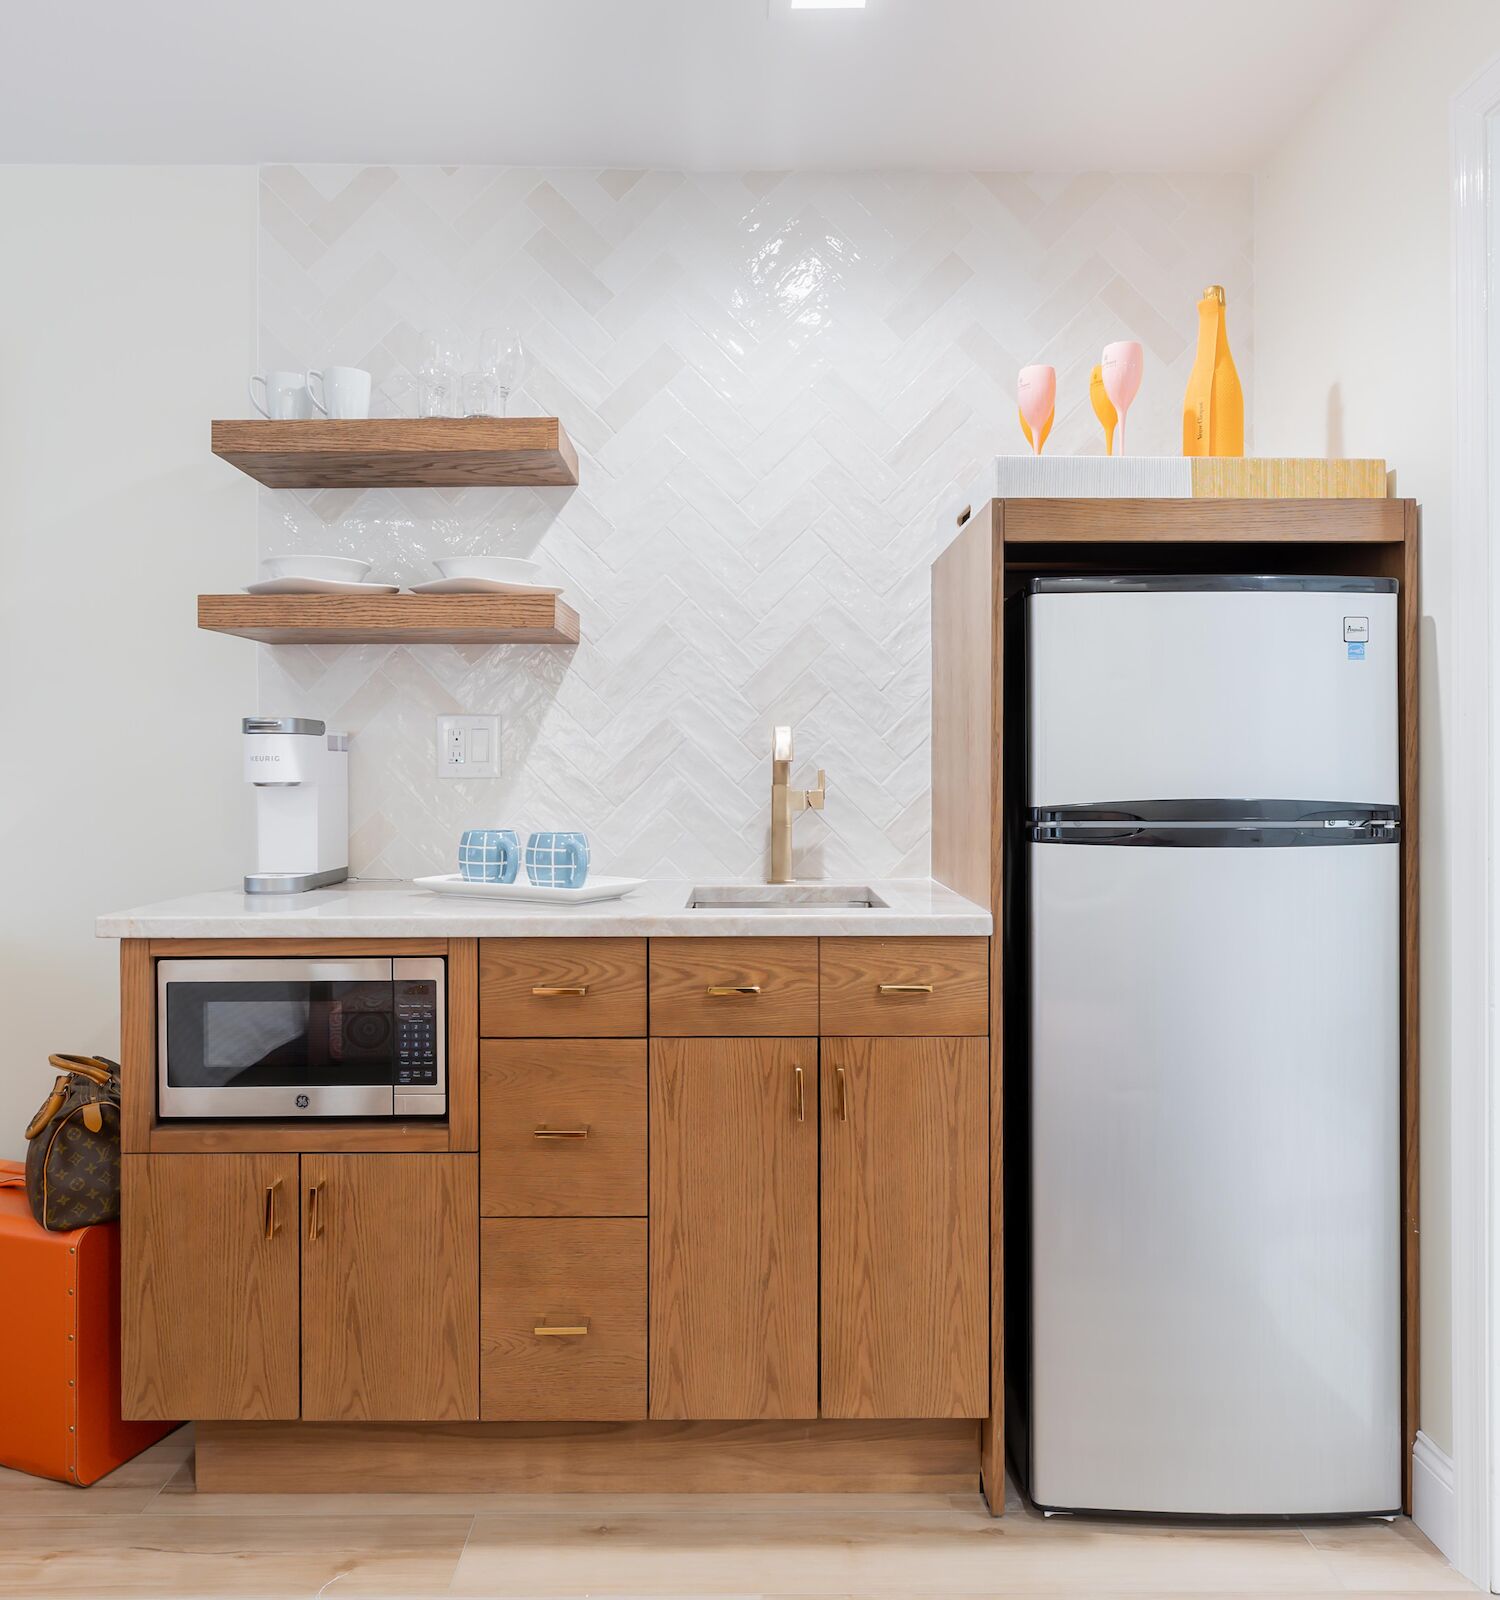 A modern kitchenette with a microwave, sink, fridge, open shelves, and orange accents, including a stool and decorative bottles.